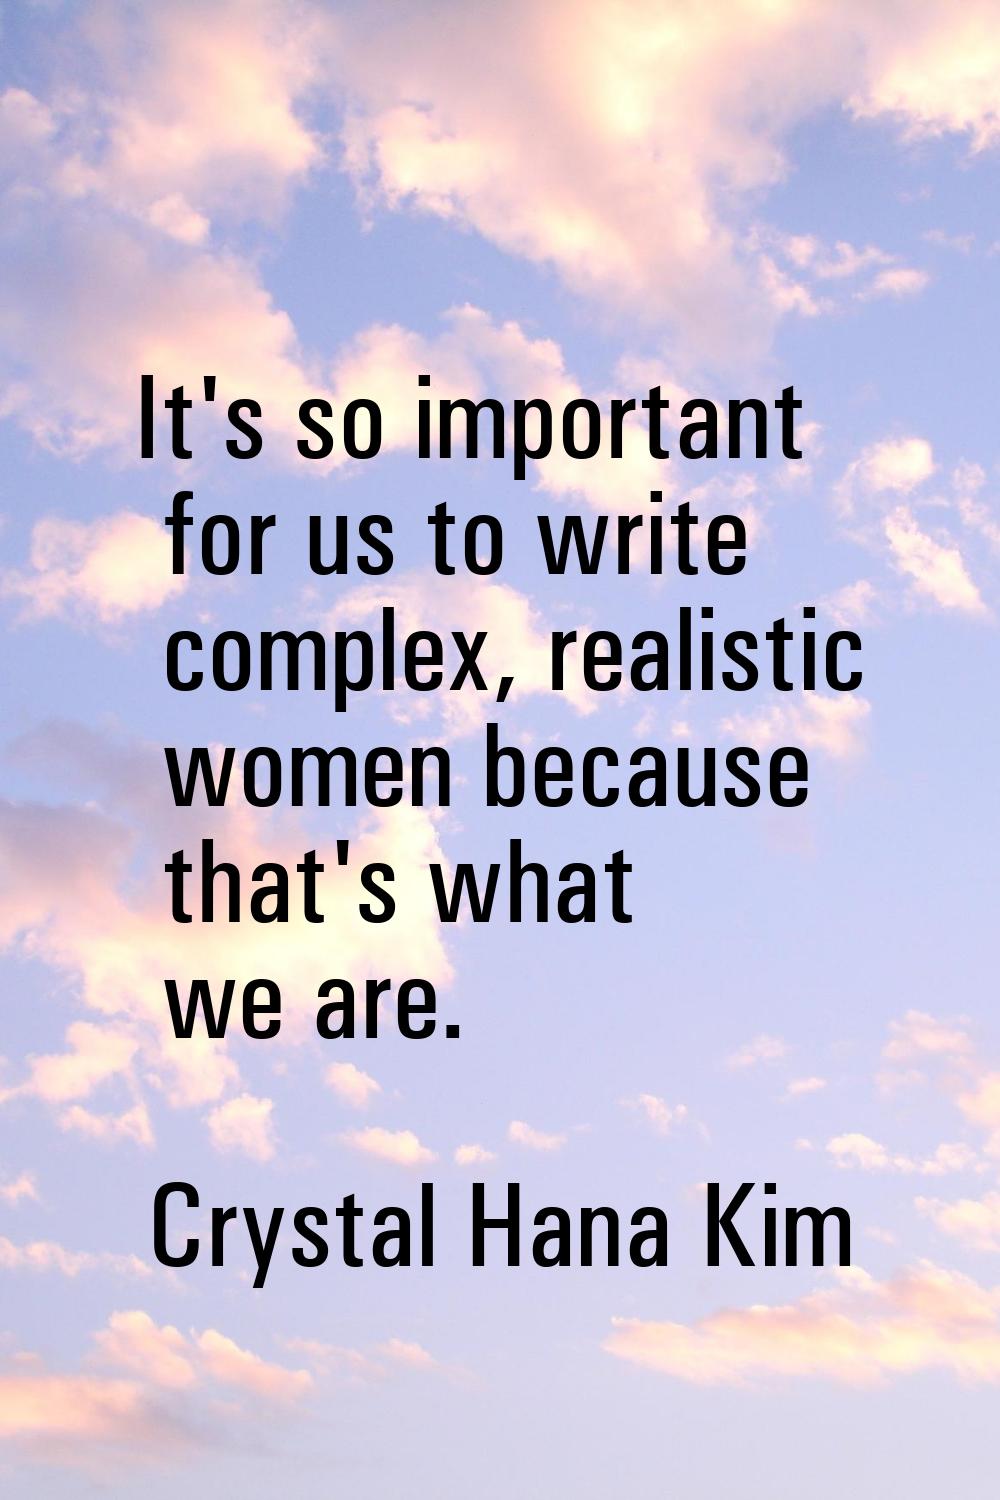 It's so important for us to write complex, realistic women because that's what we are.